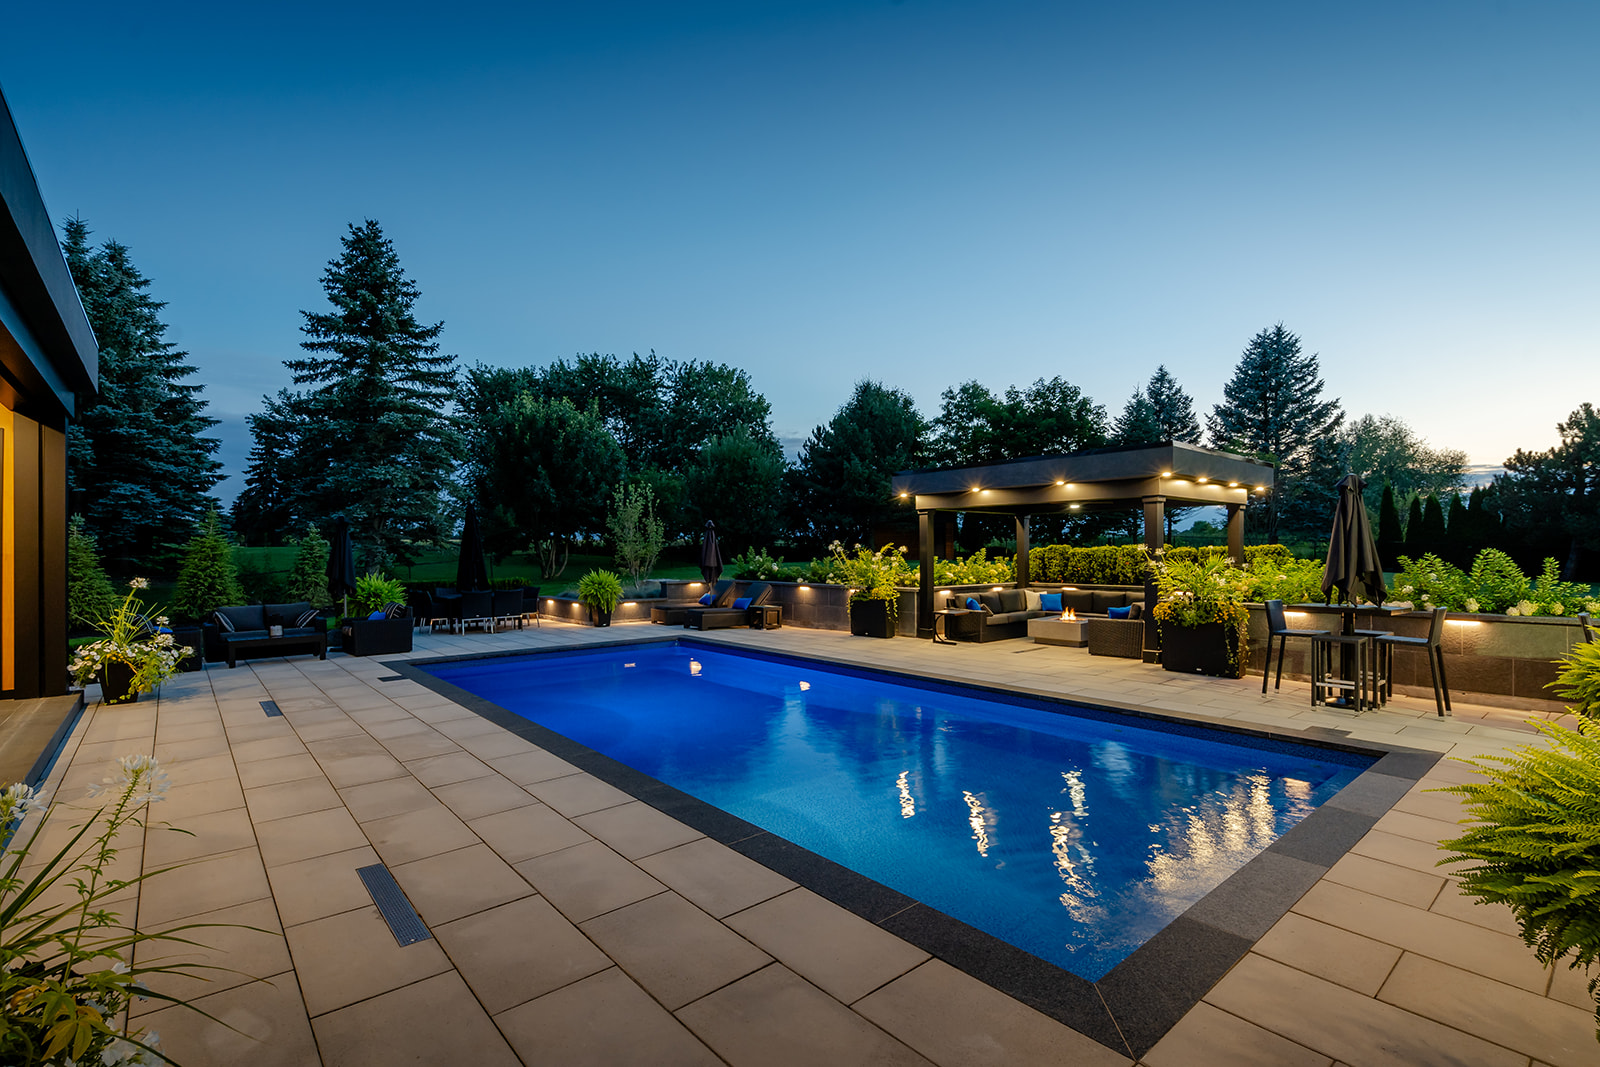 A rectangular inground pool surrounded by patio stones.